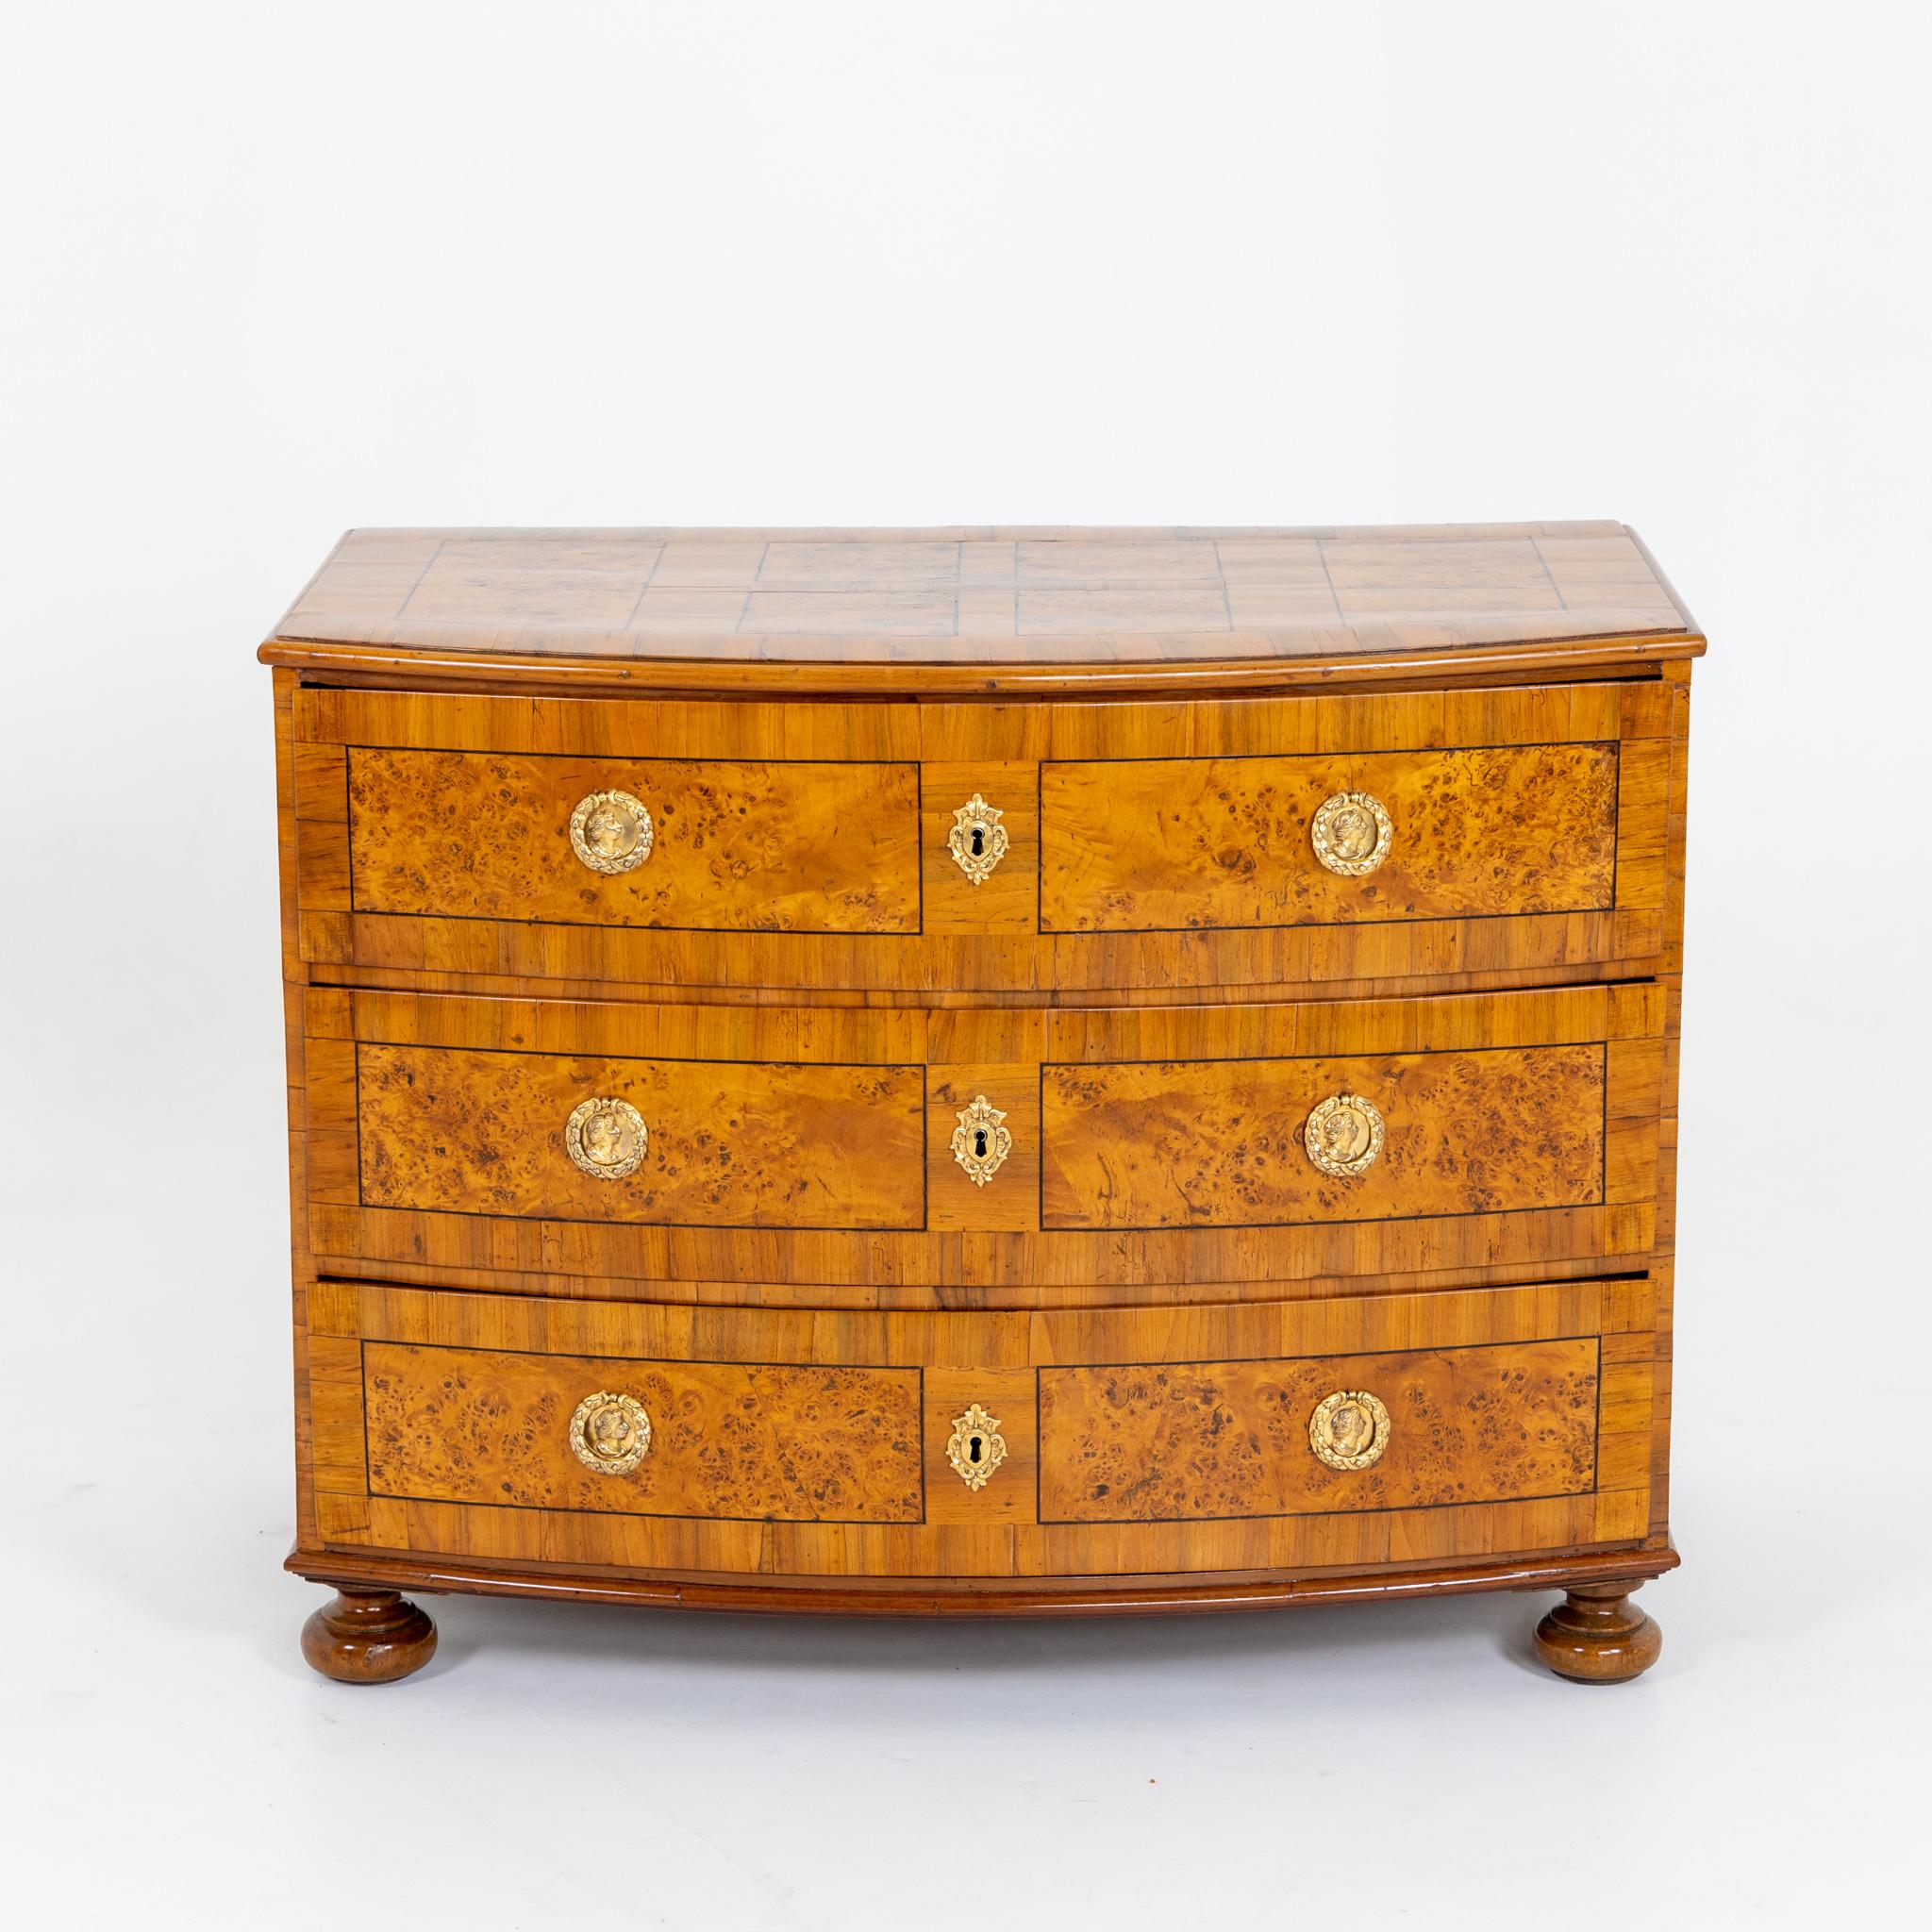 Baroque chest of drawers with three drawers and slightly bulged front on low baluster legs. Restored and hand polished condition.